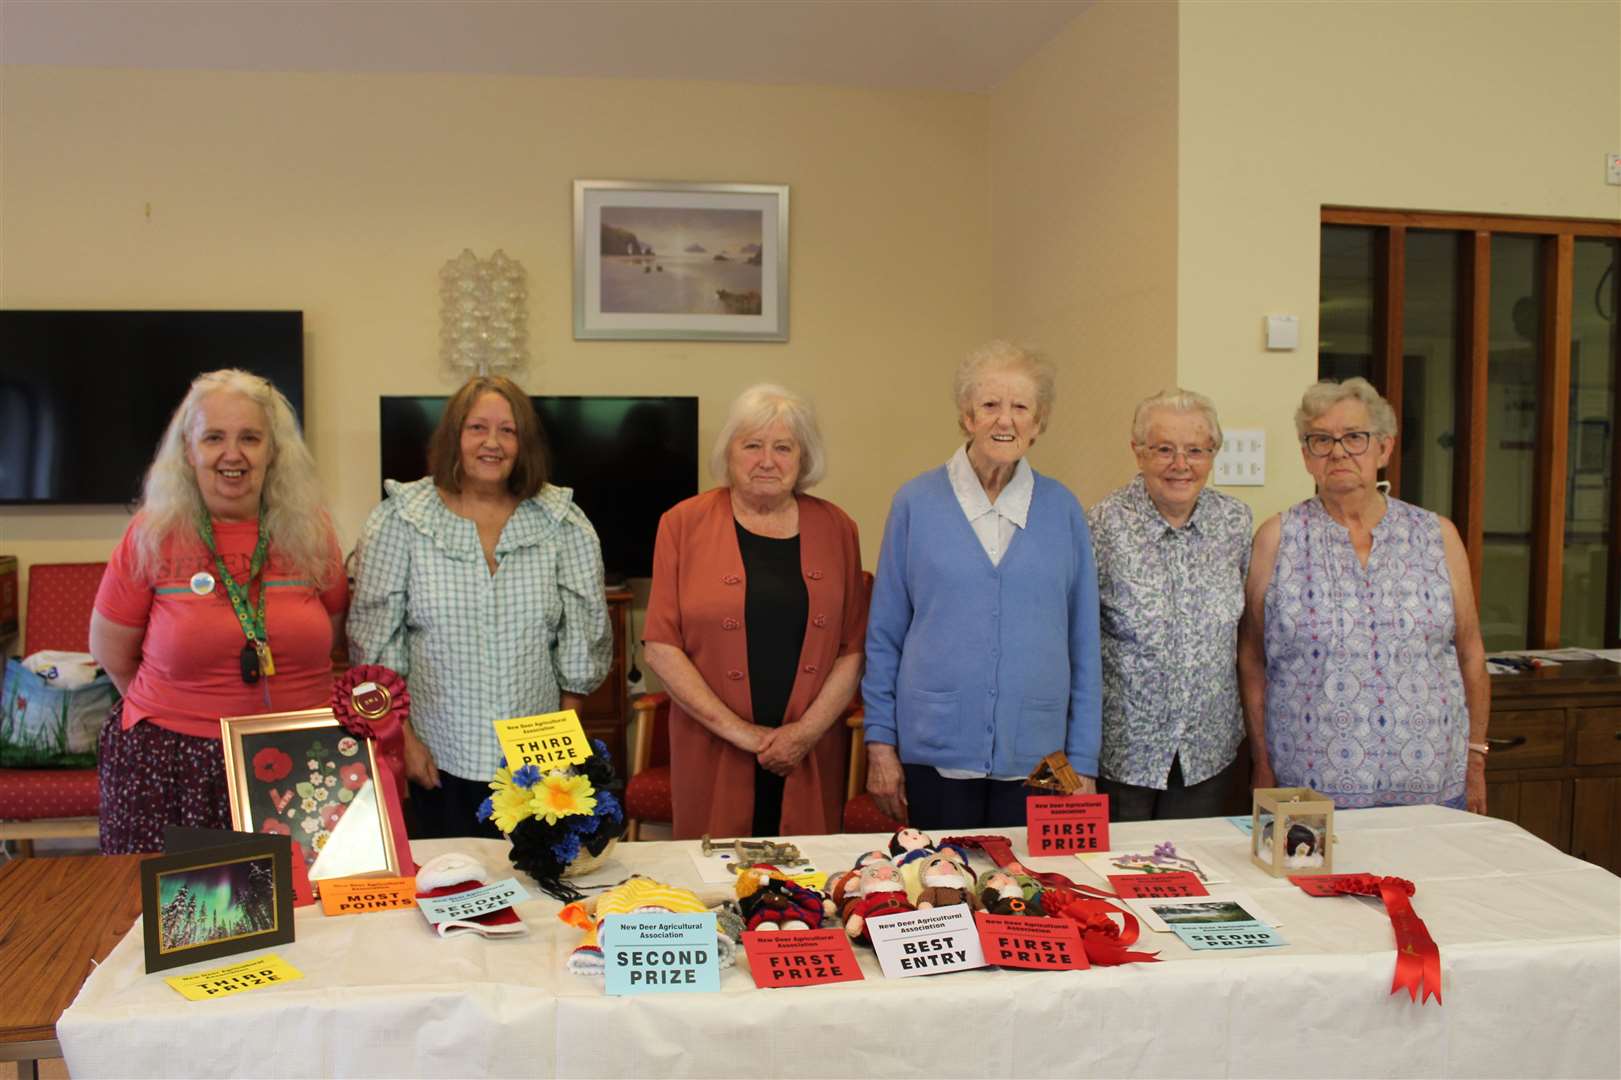 The residents of Summerhill House with their entries and prizes. Picture: Kyle Ritchie